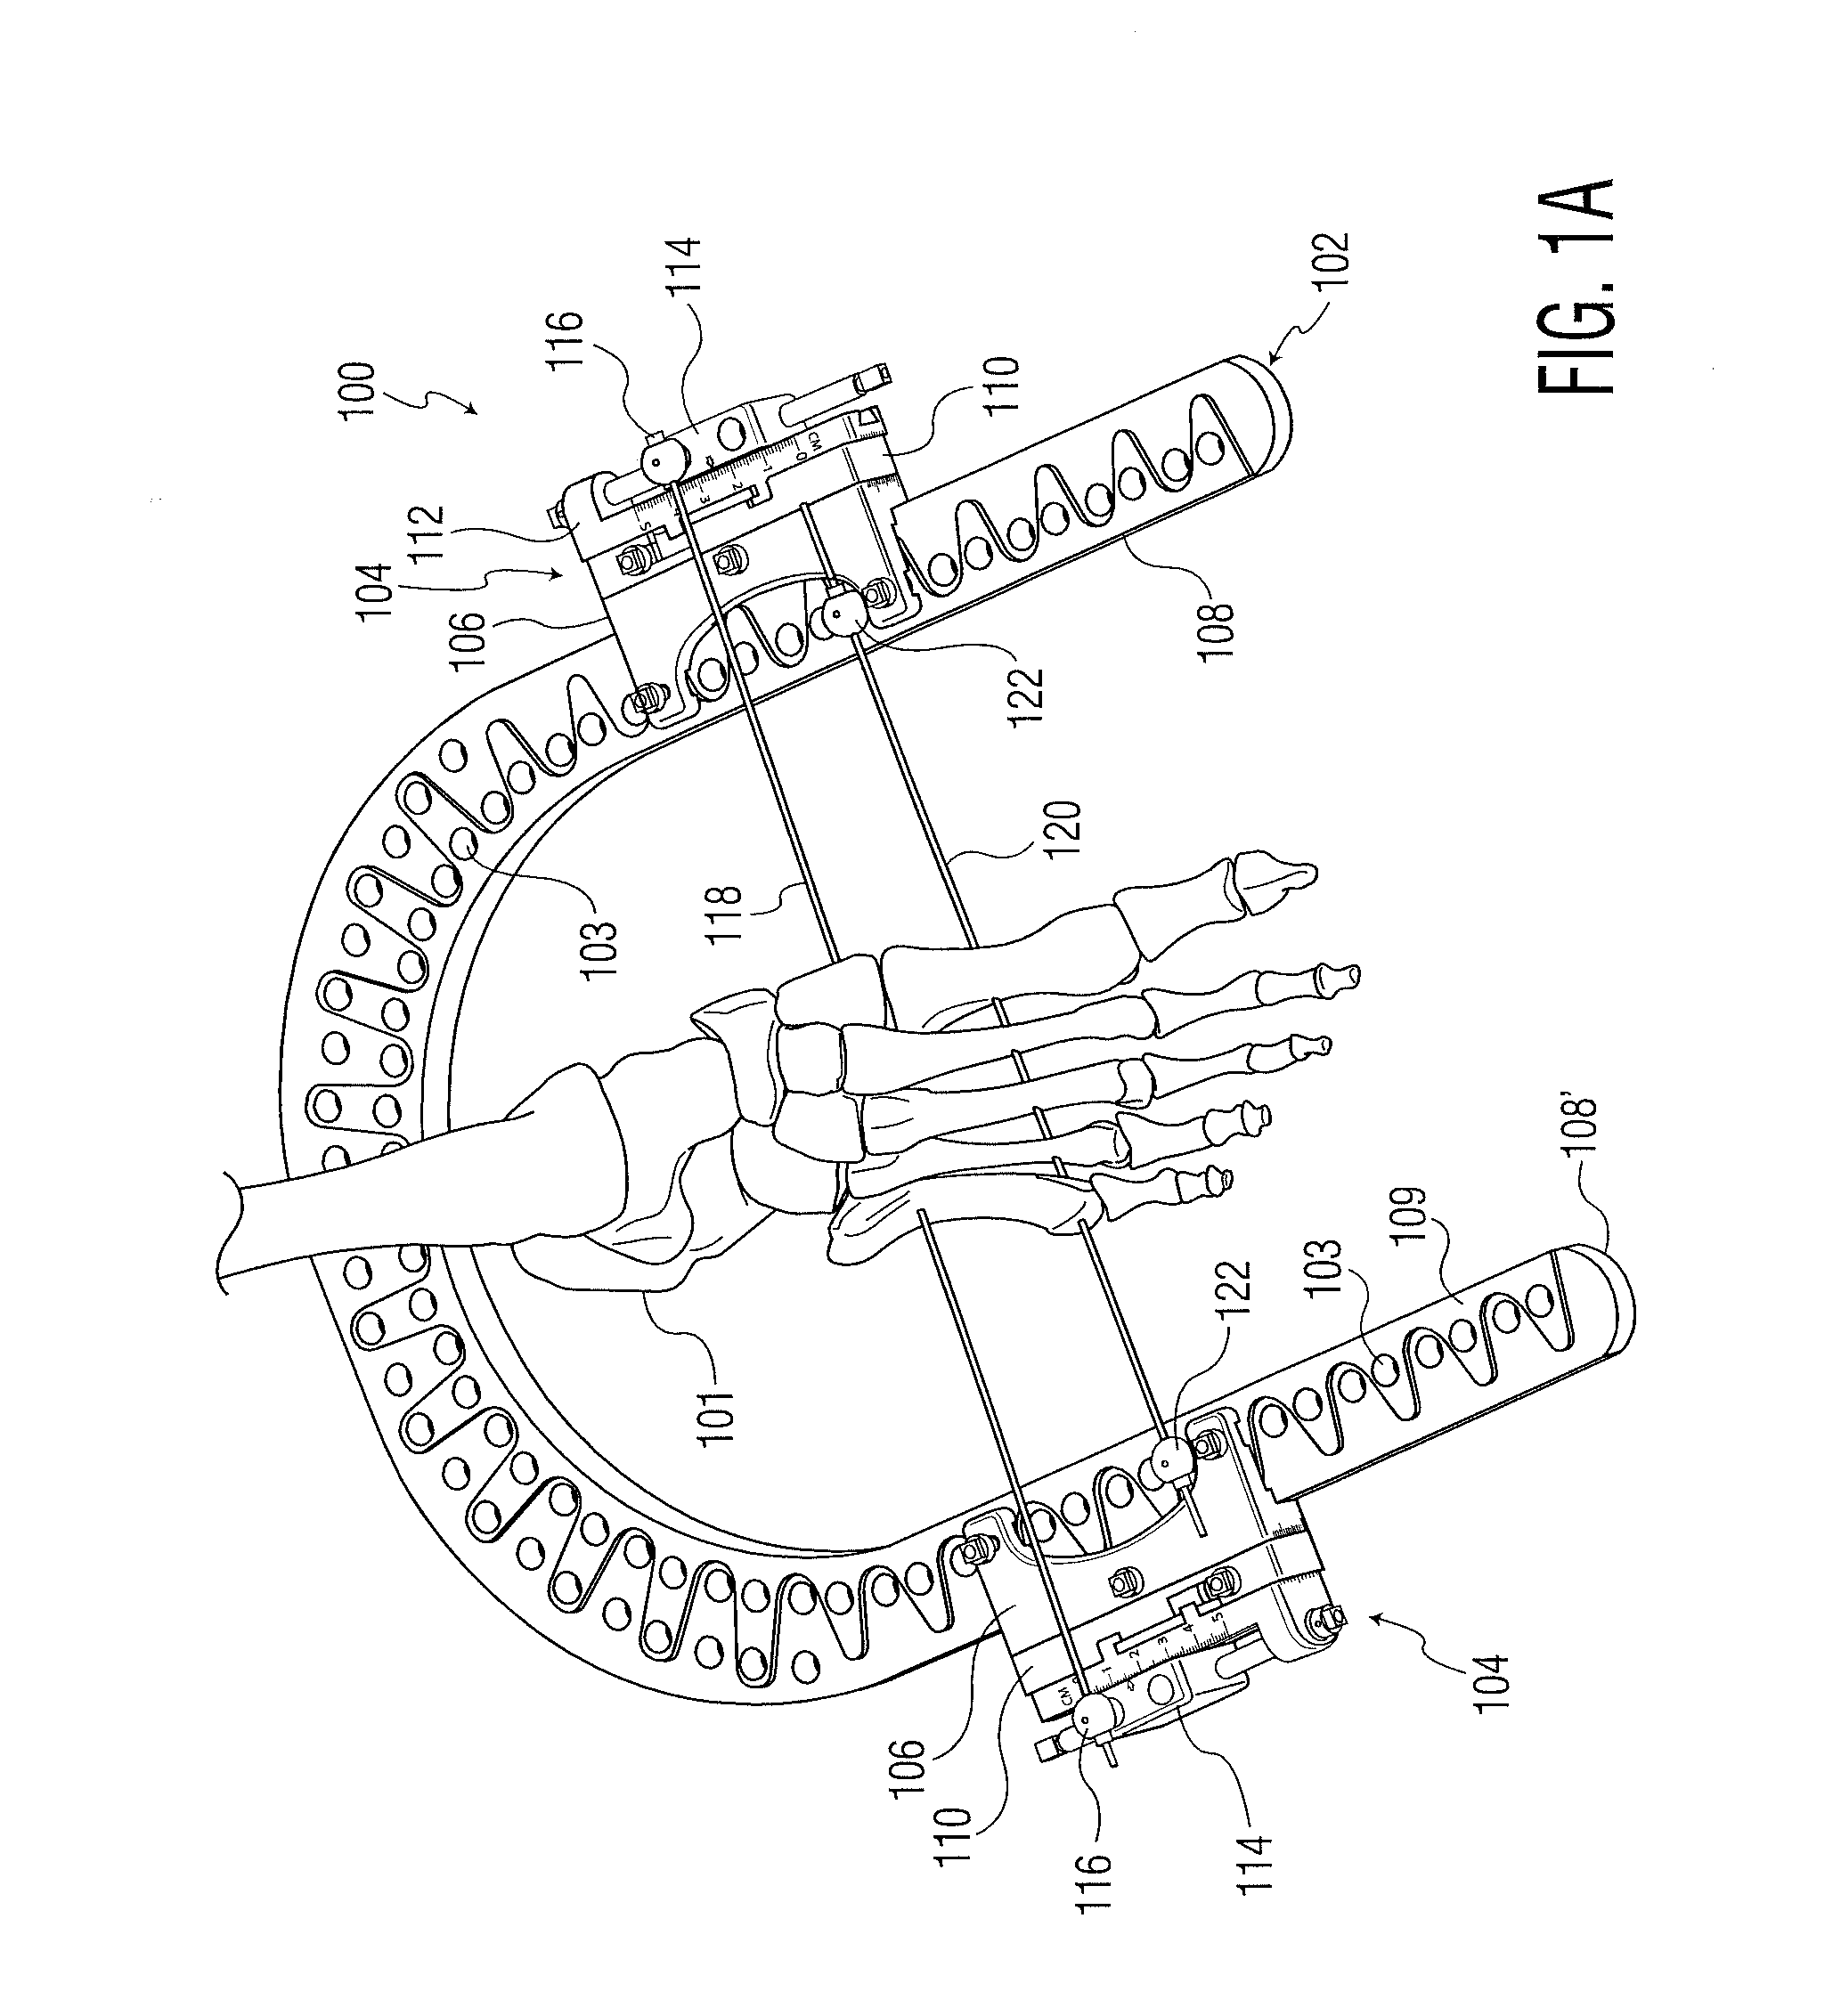 Dynamic external fixator and methods for use